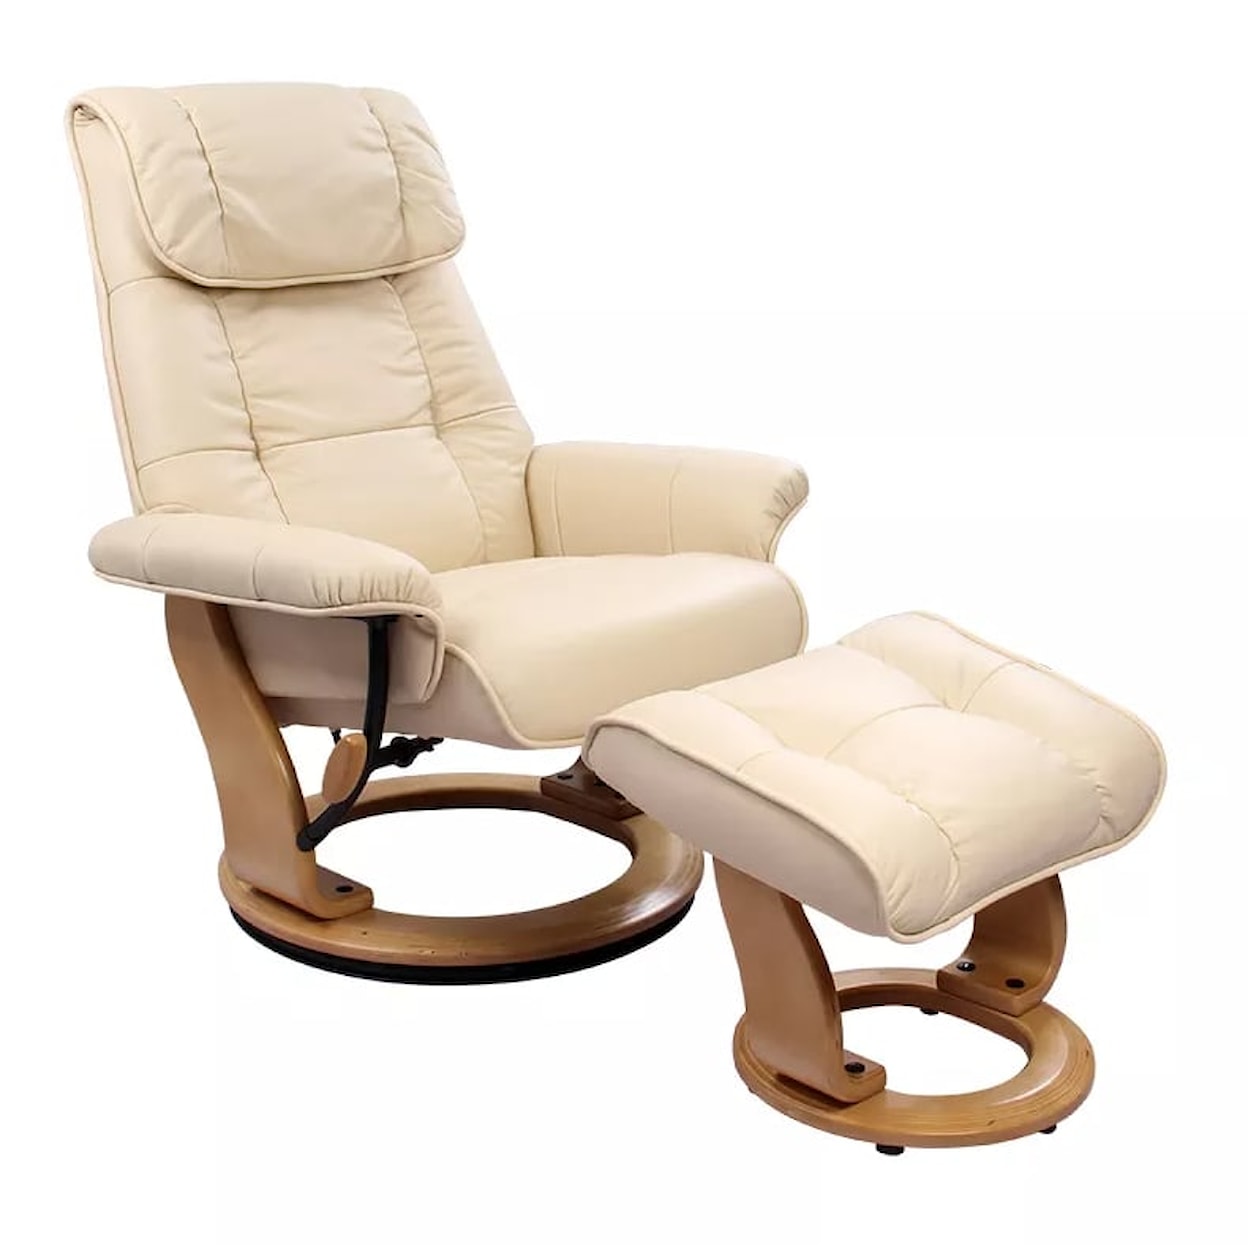 Benchmaster Ventura II Reclining Chair and Ottoman w/ Natural Wood